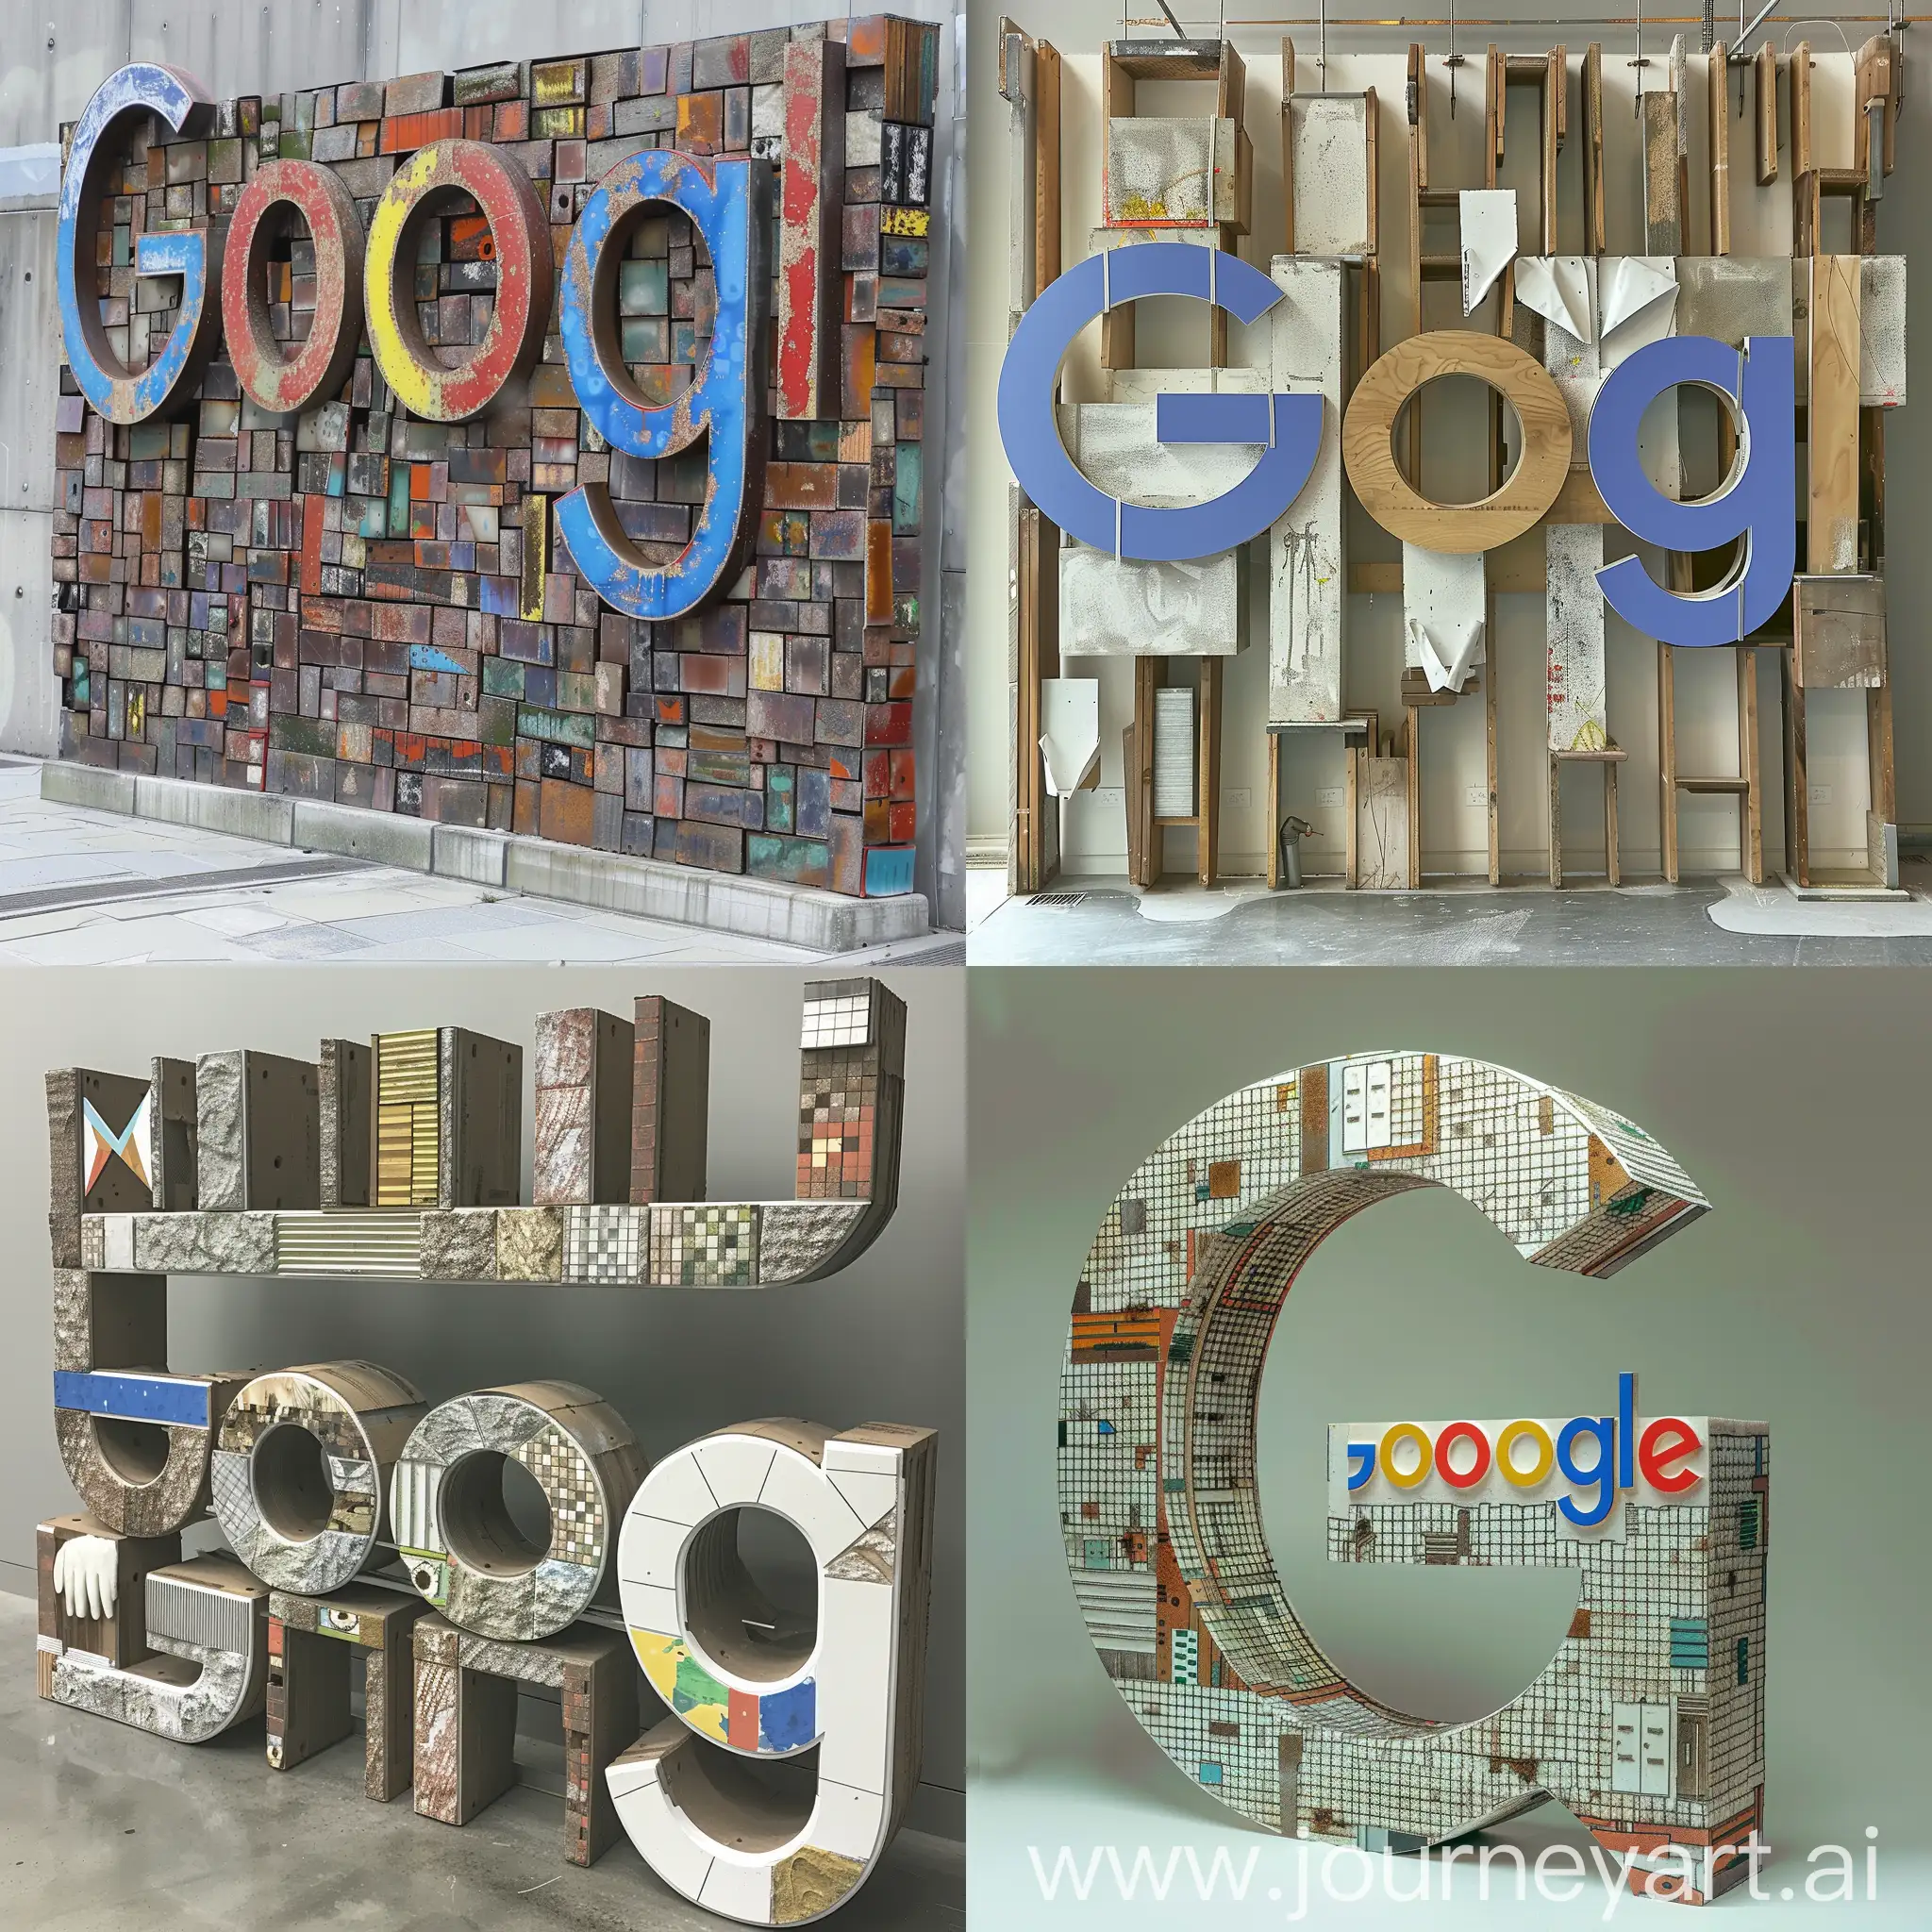 Fill in the word Google with architectural elements and textures